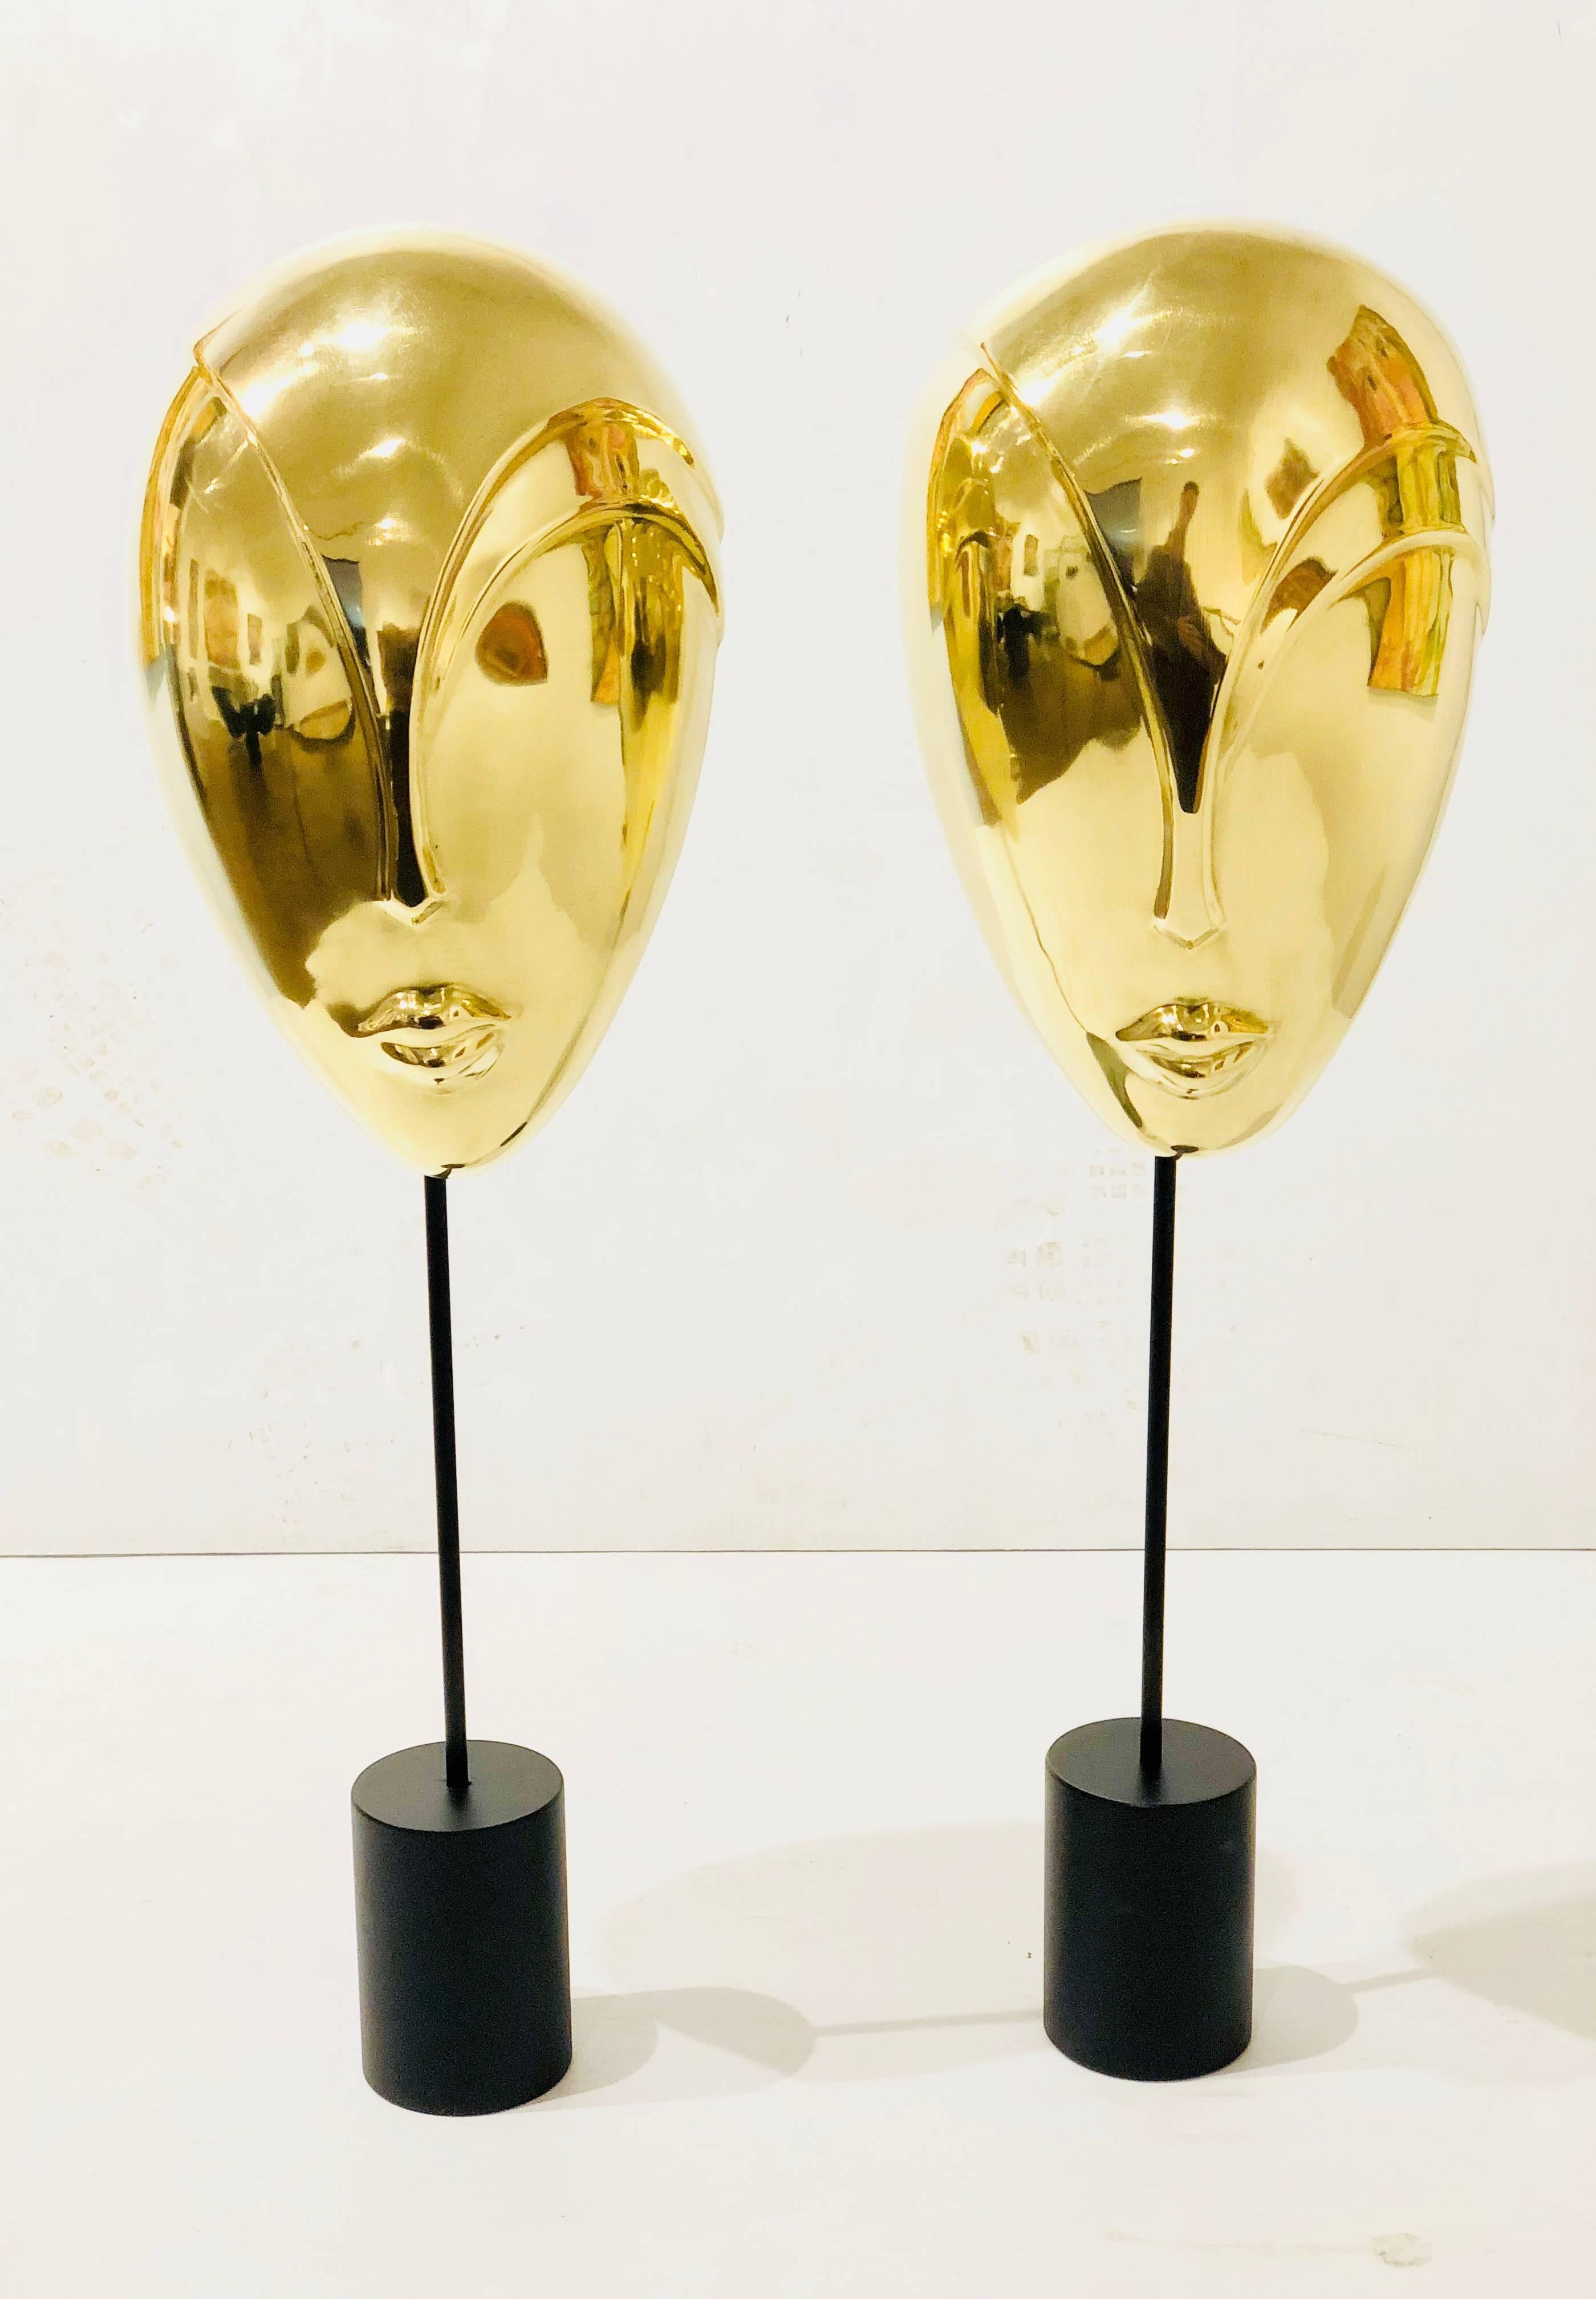 Unique pair of solid brass decorative masks sculptures in polished brass finish with black enamel finish bases.